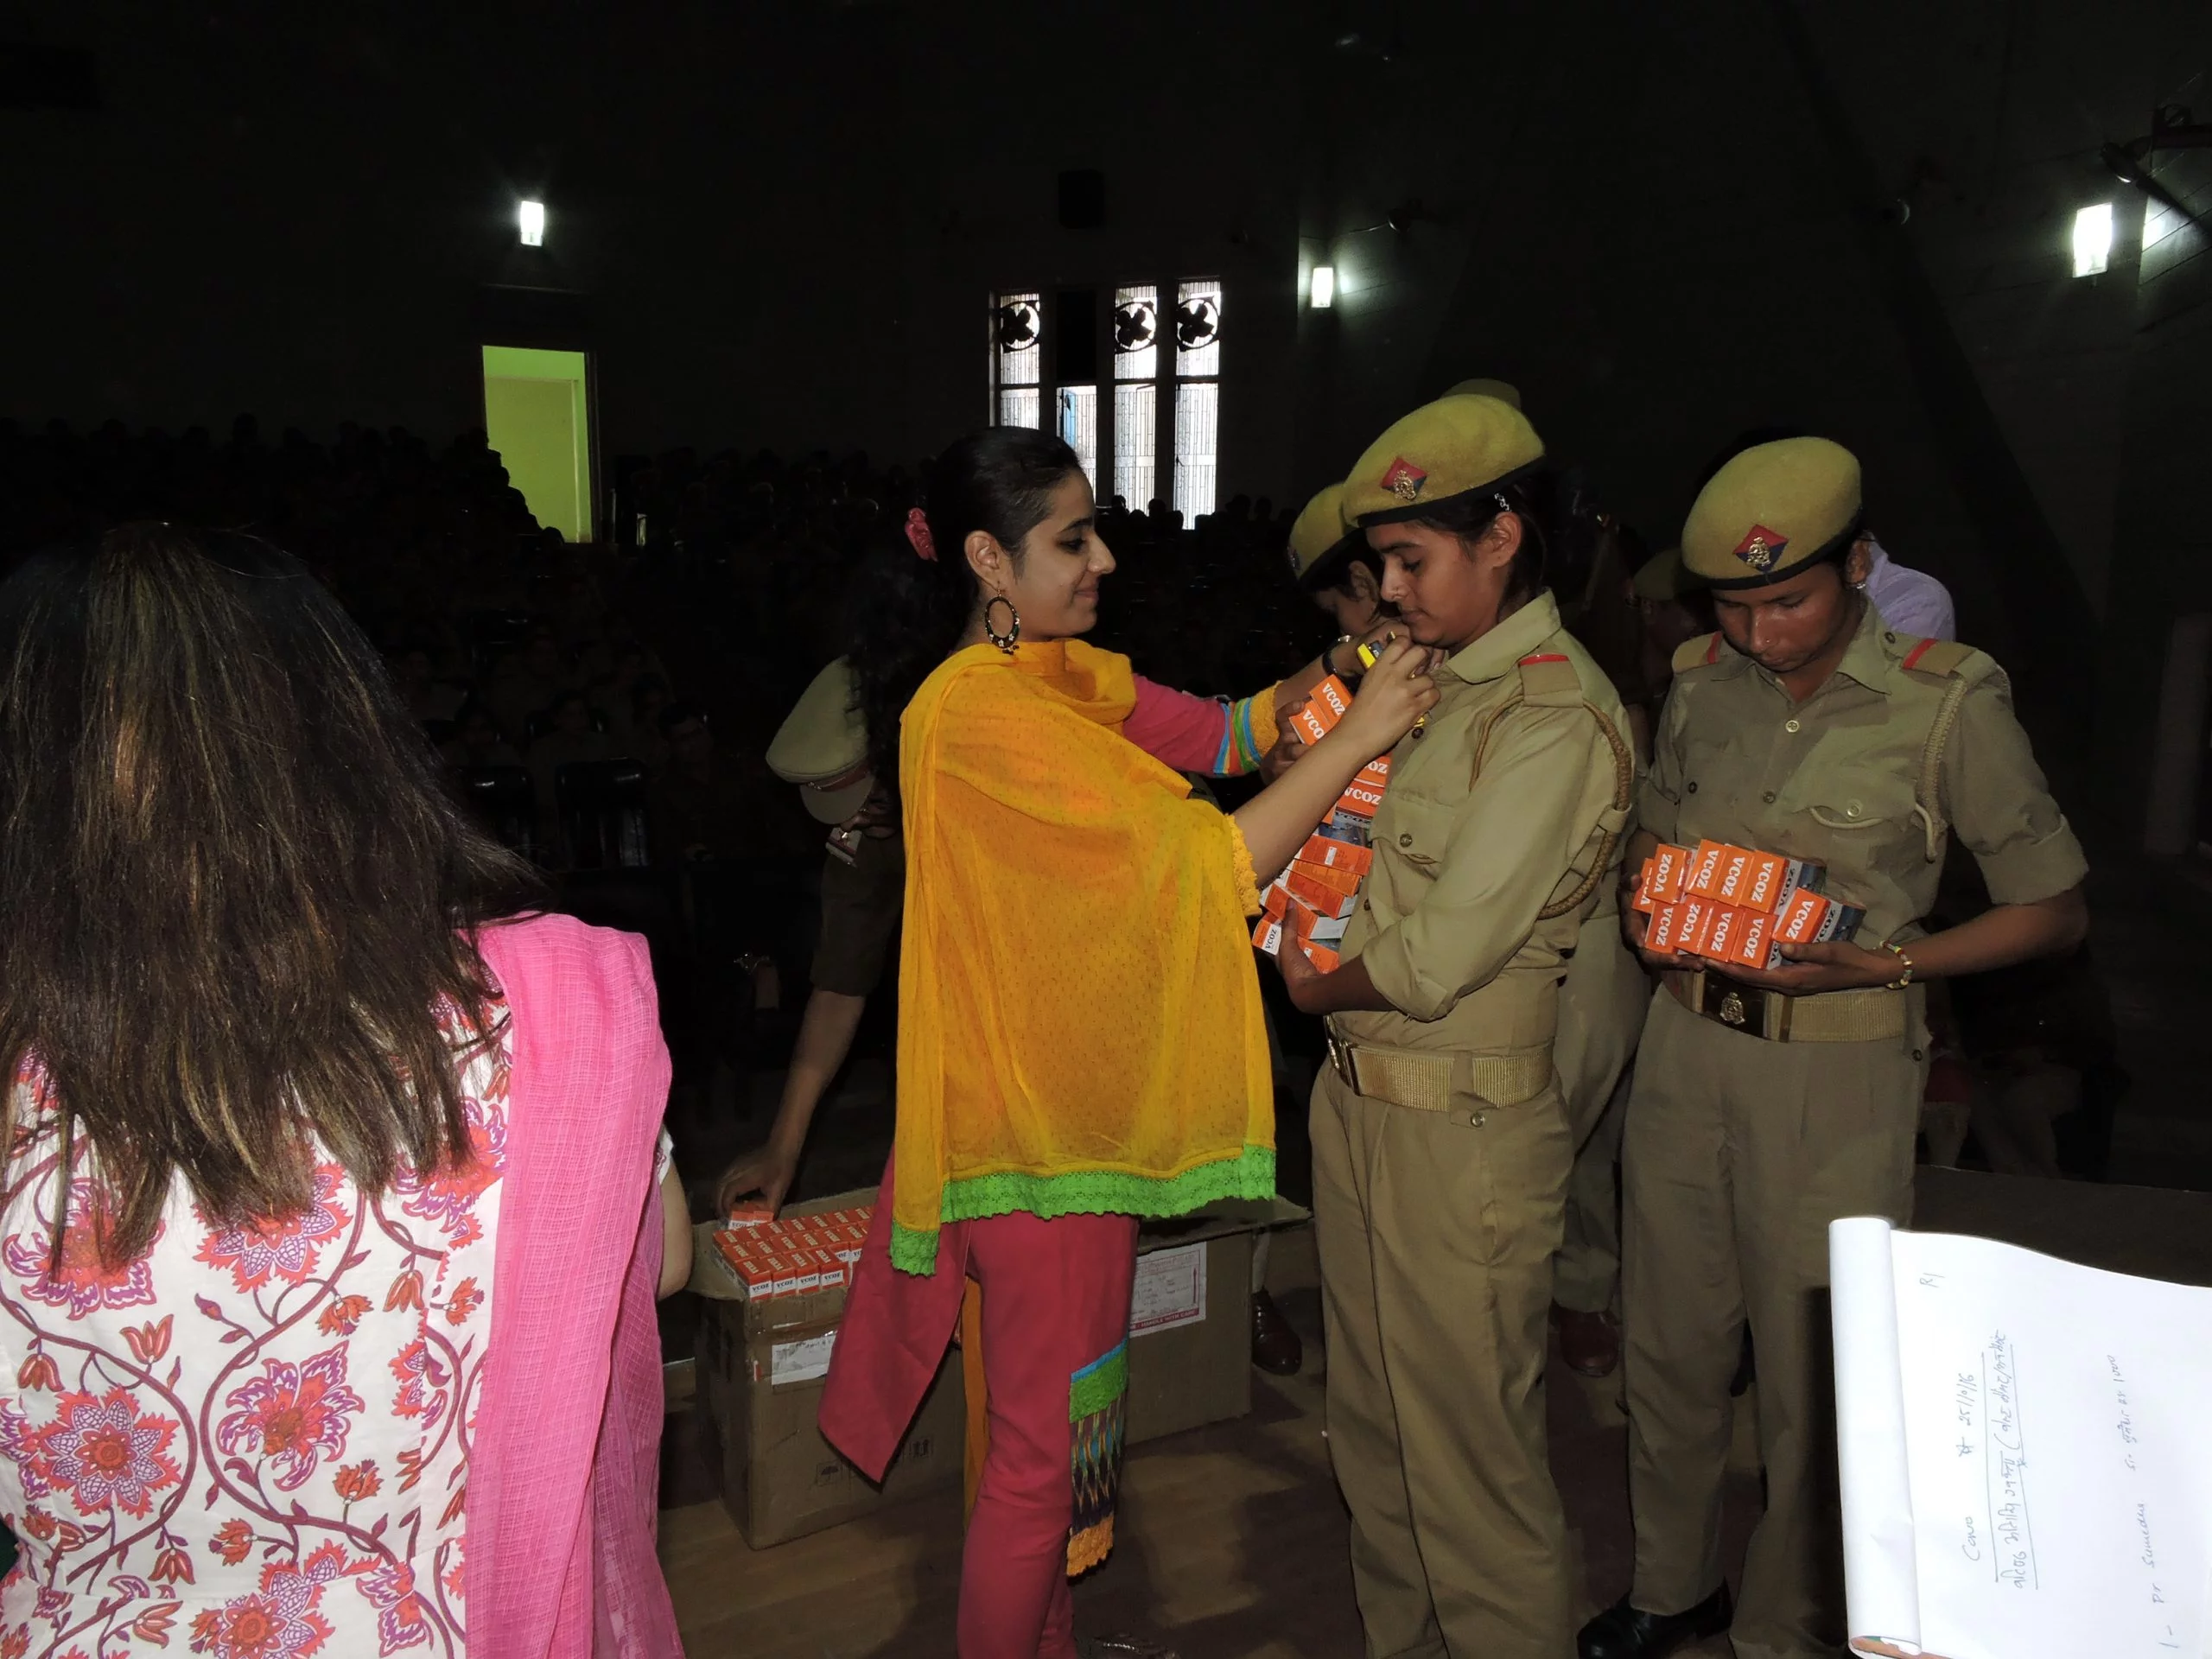 Health Education Camp & Breast Cancer Awareness organised at the Police Training Academy, Moradabad